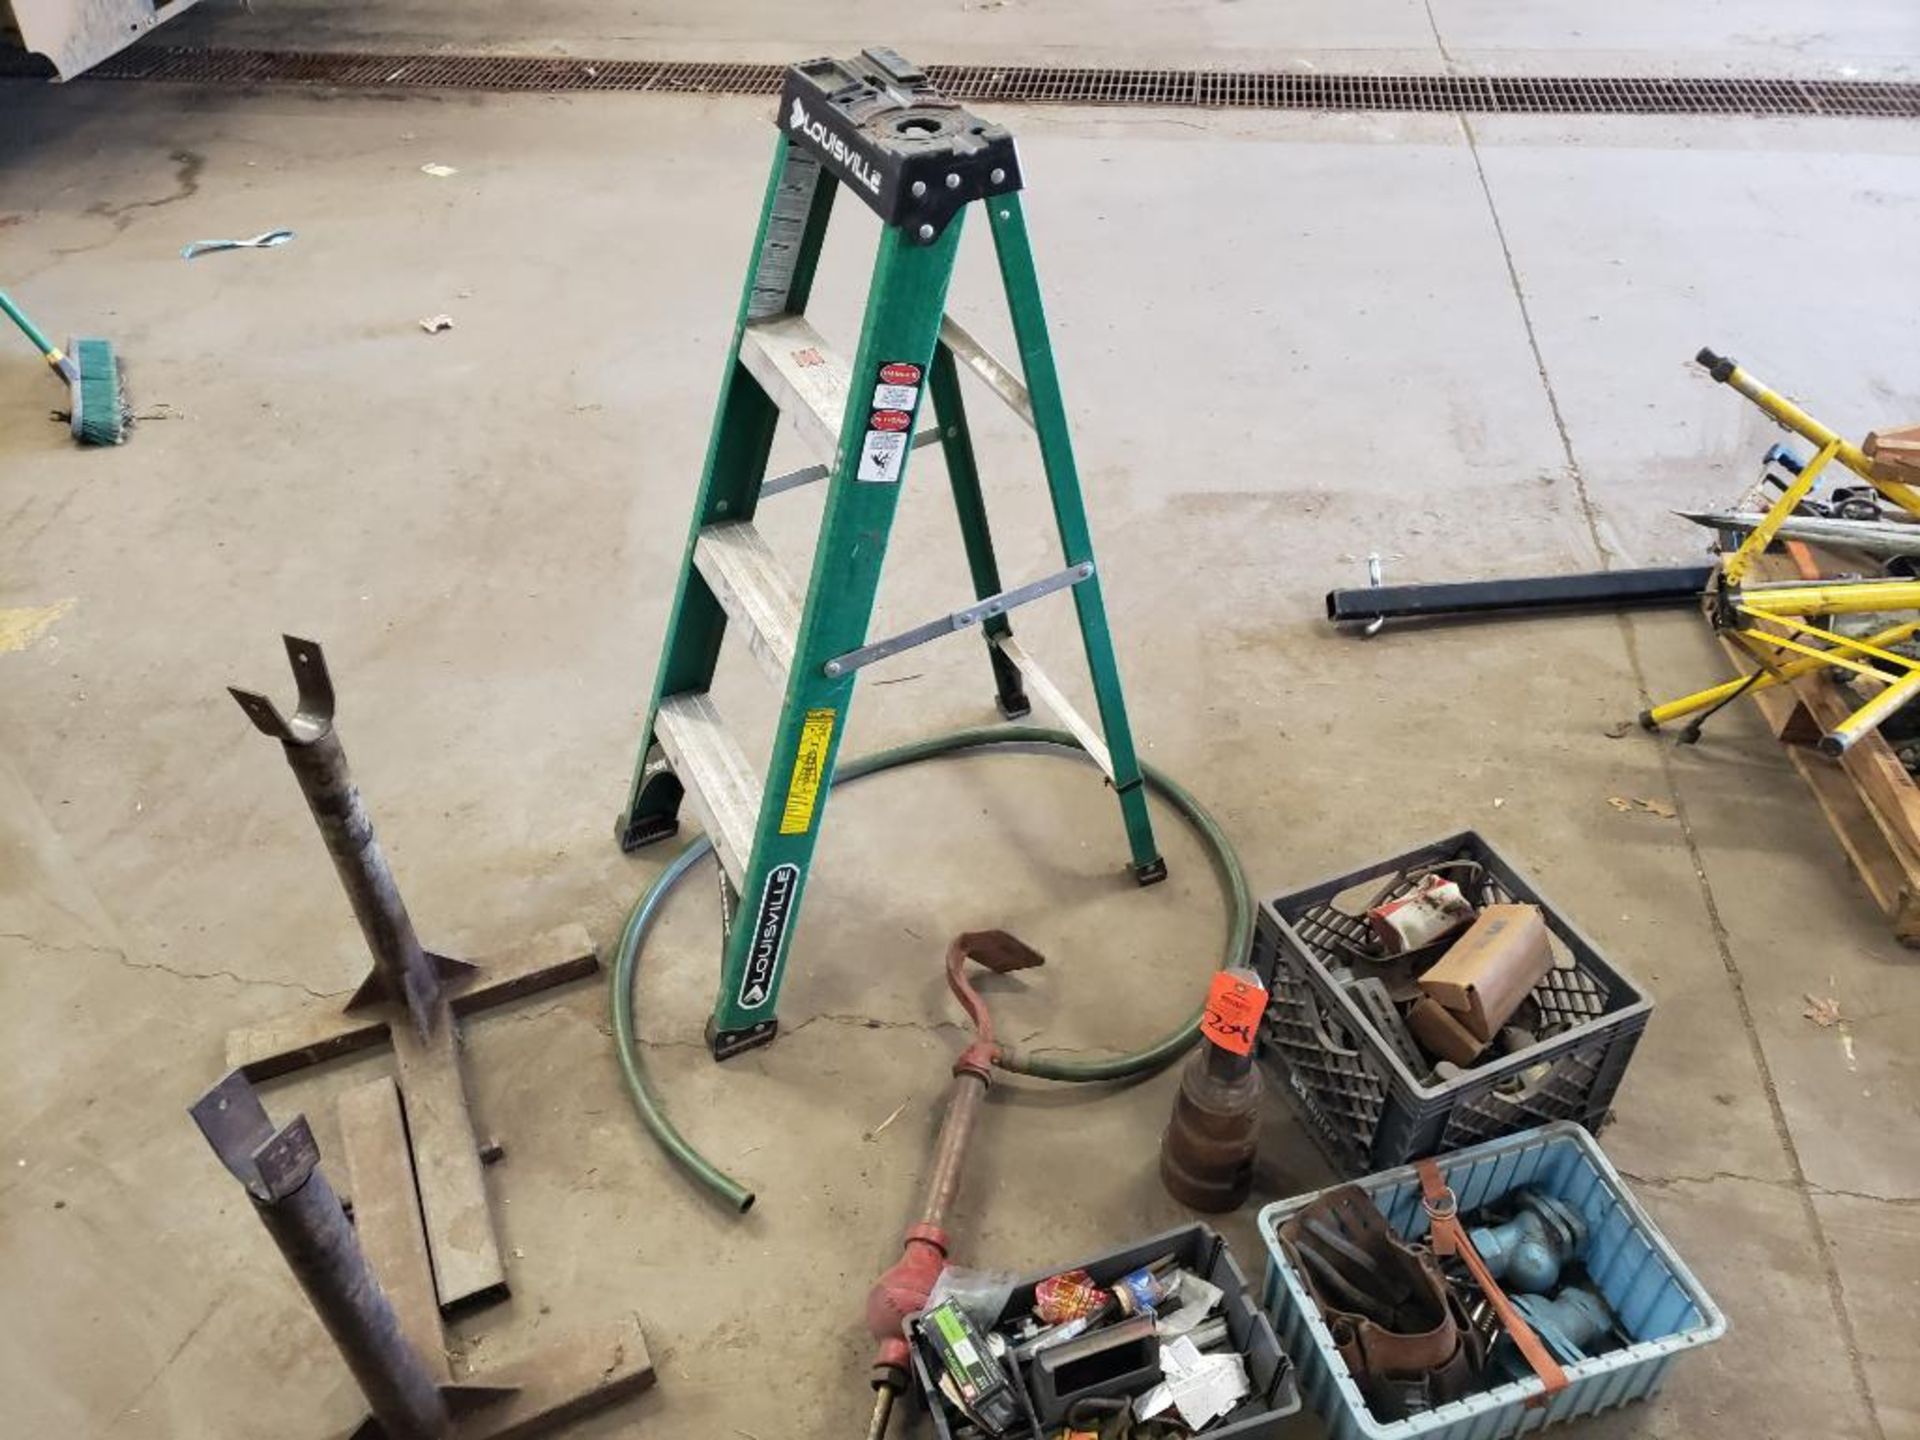 Ladder and assorted tools.